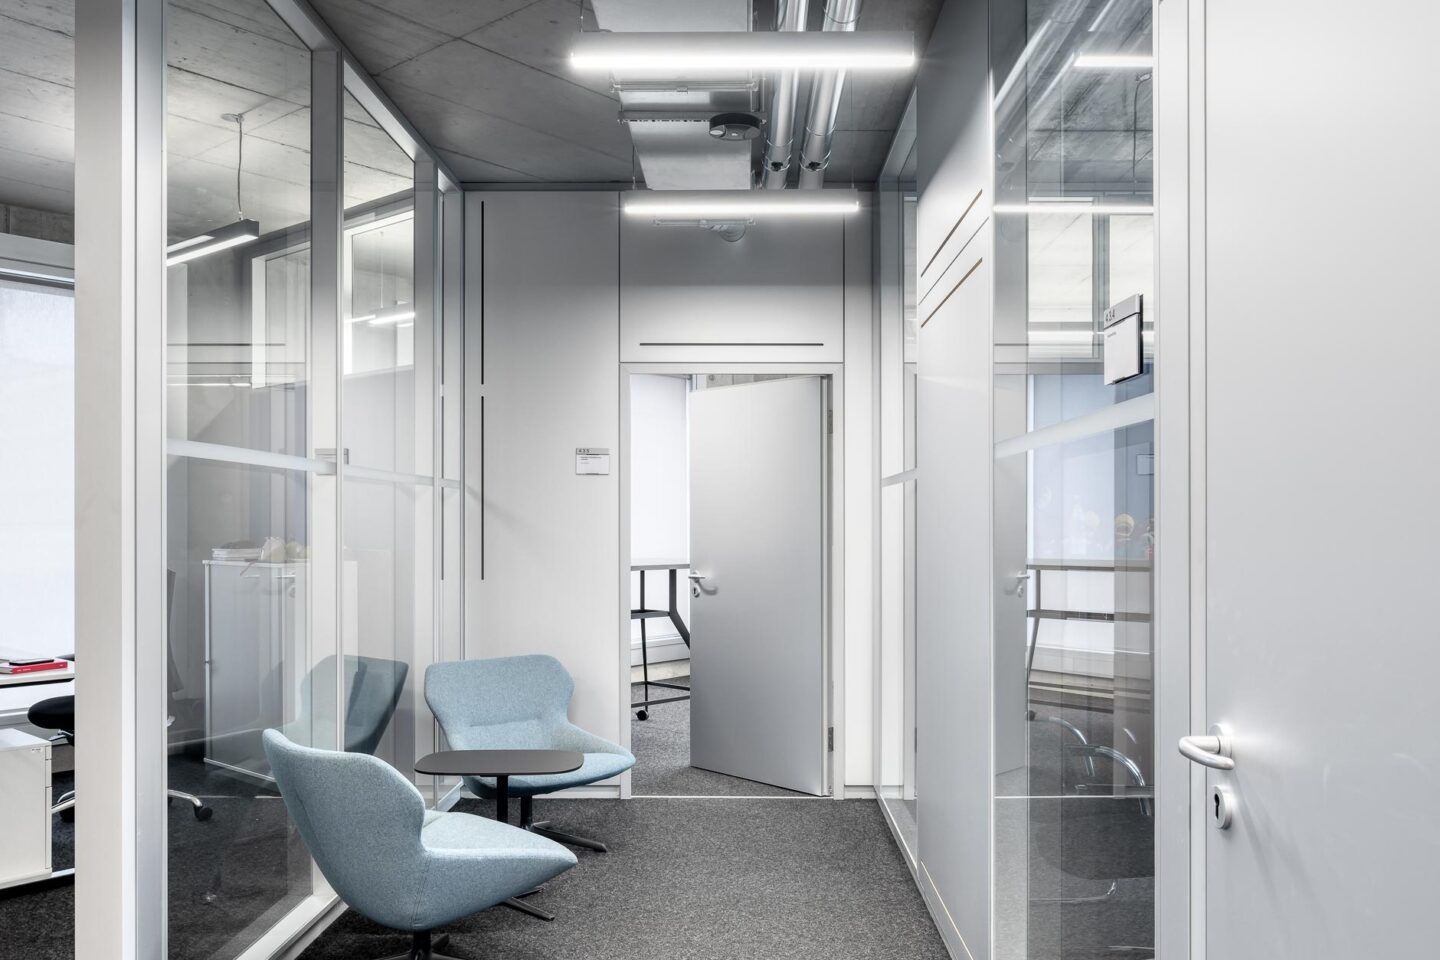 Identity-creating working environment │ SWR Gate Building, Baden-Baden